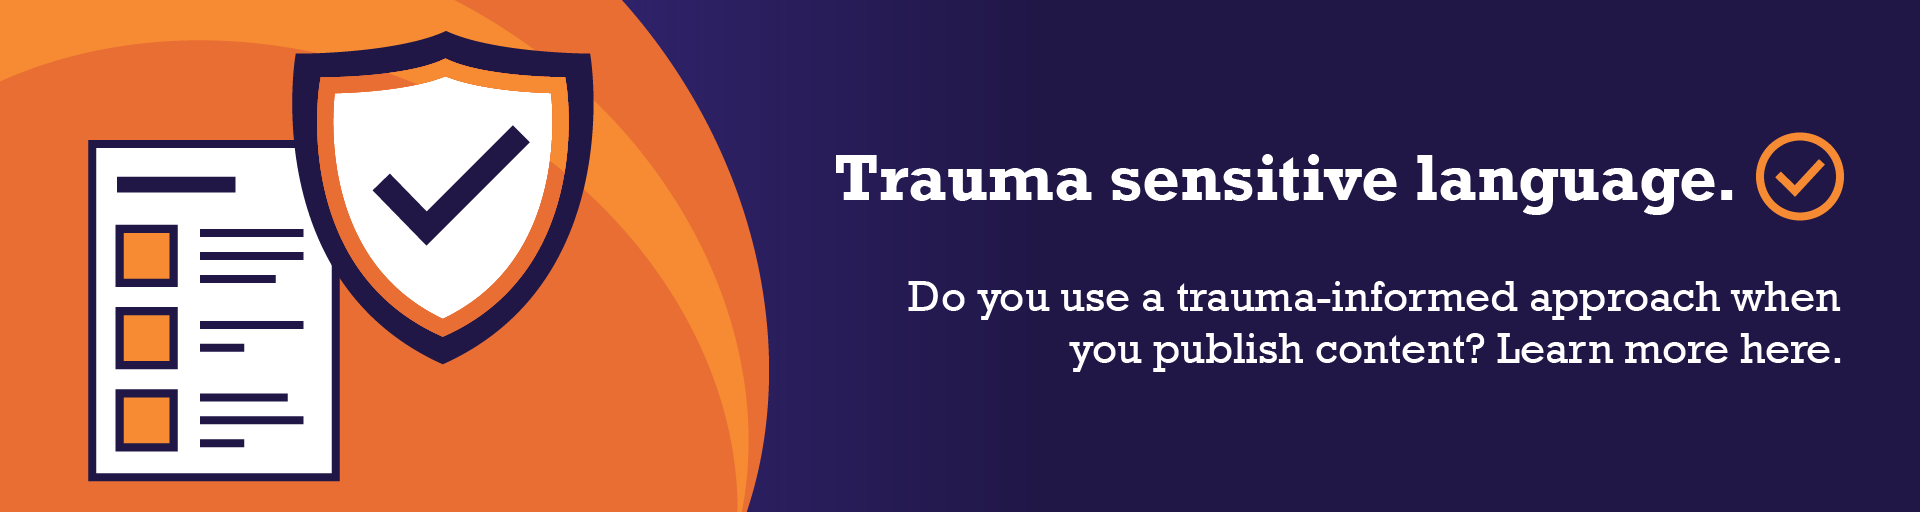 Trauma sensitive language. Do you use a trauma-informed approach when you publish content? Learn more here.